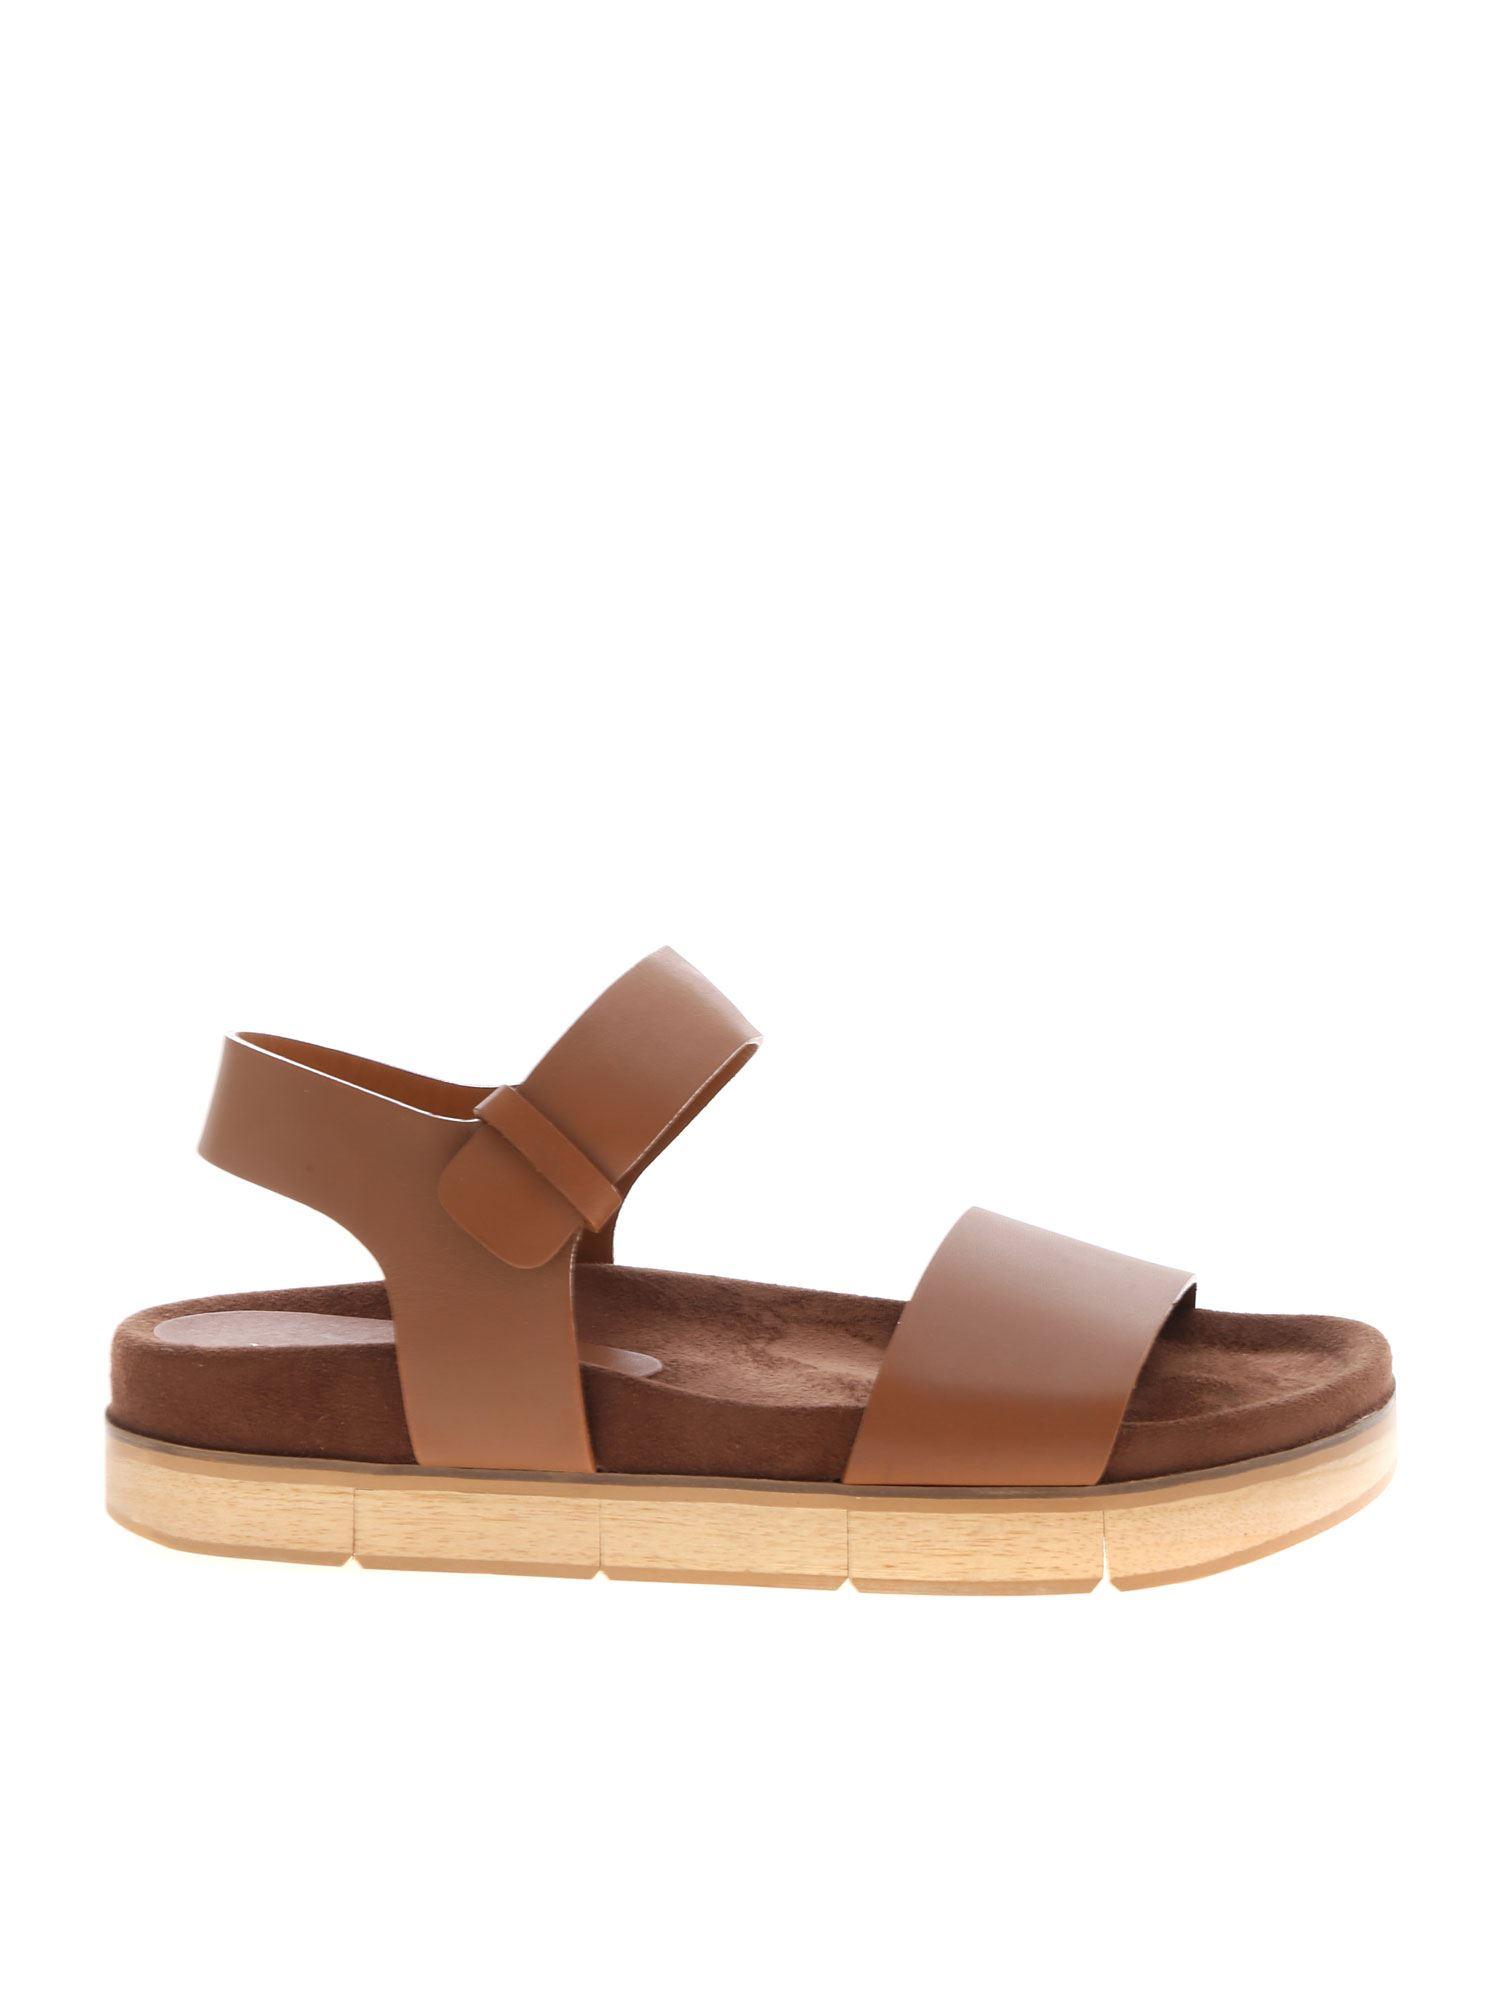 Paloma Barceló Leather Keiko Sandals In Brown - Save 10% - Lyst